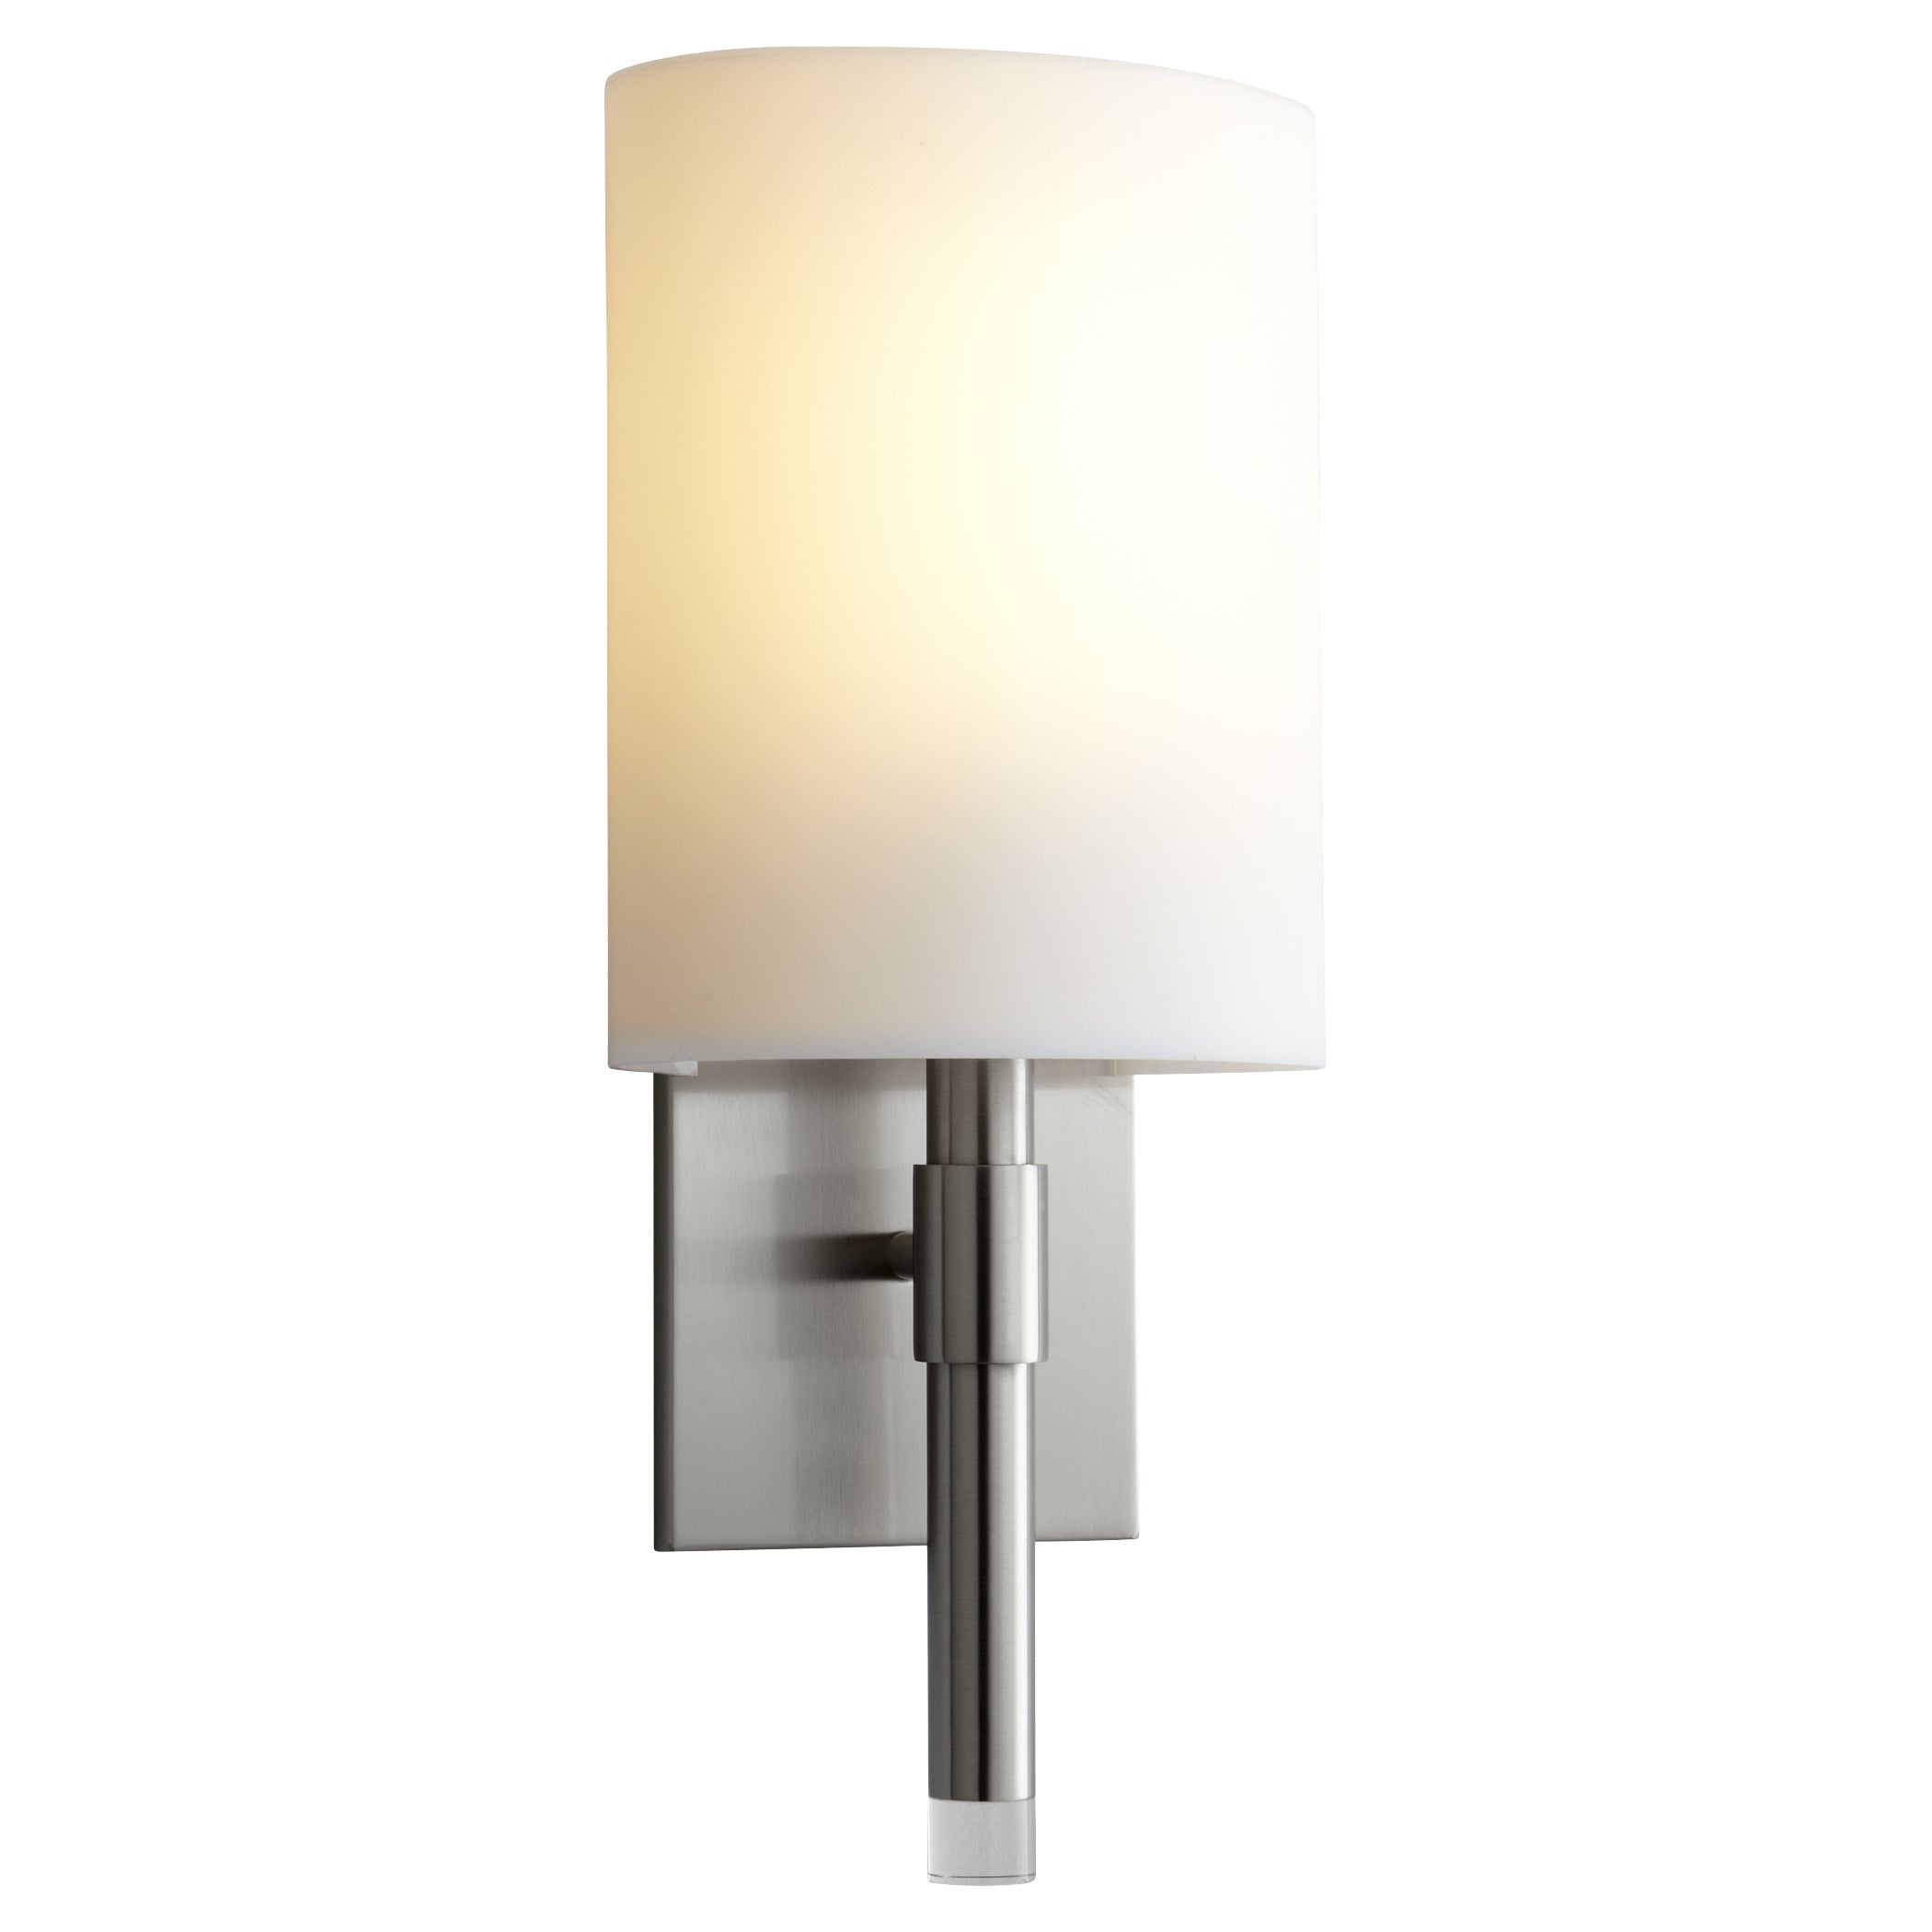 Oxygen Beacon 3-587-224 Traditional Classic Wall Sconce Light - Satin Brass